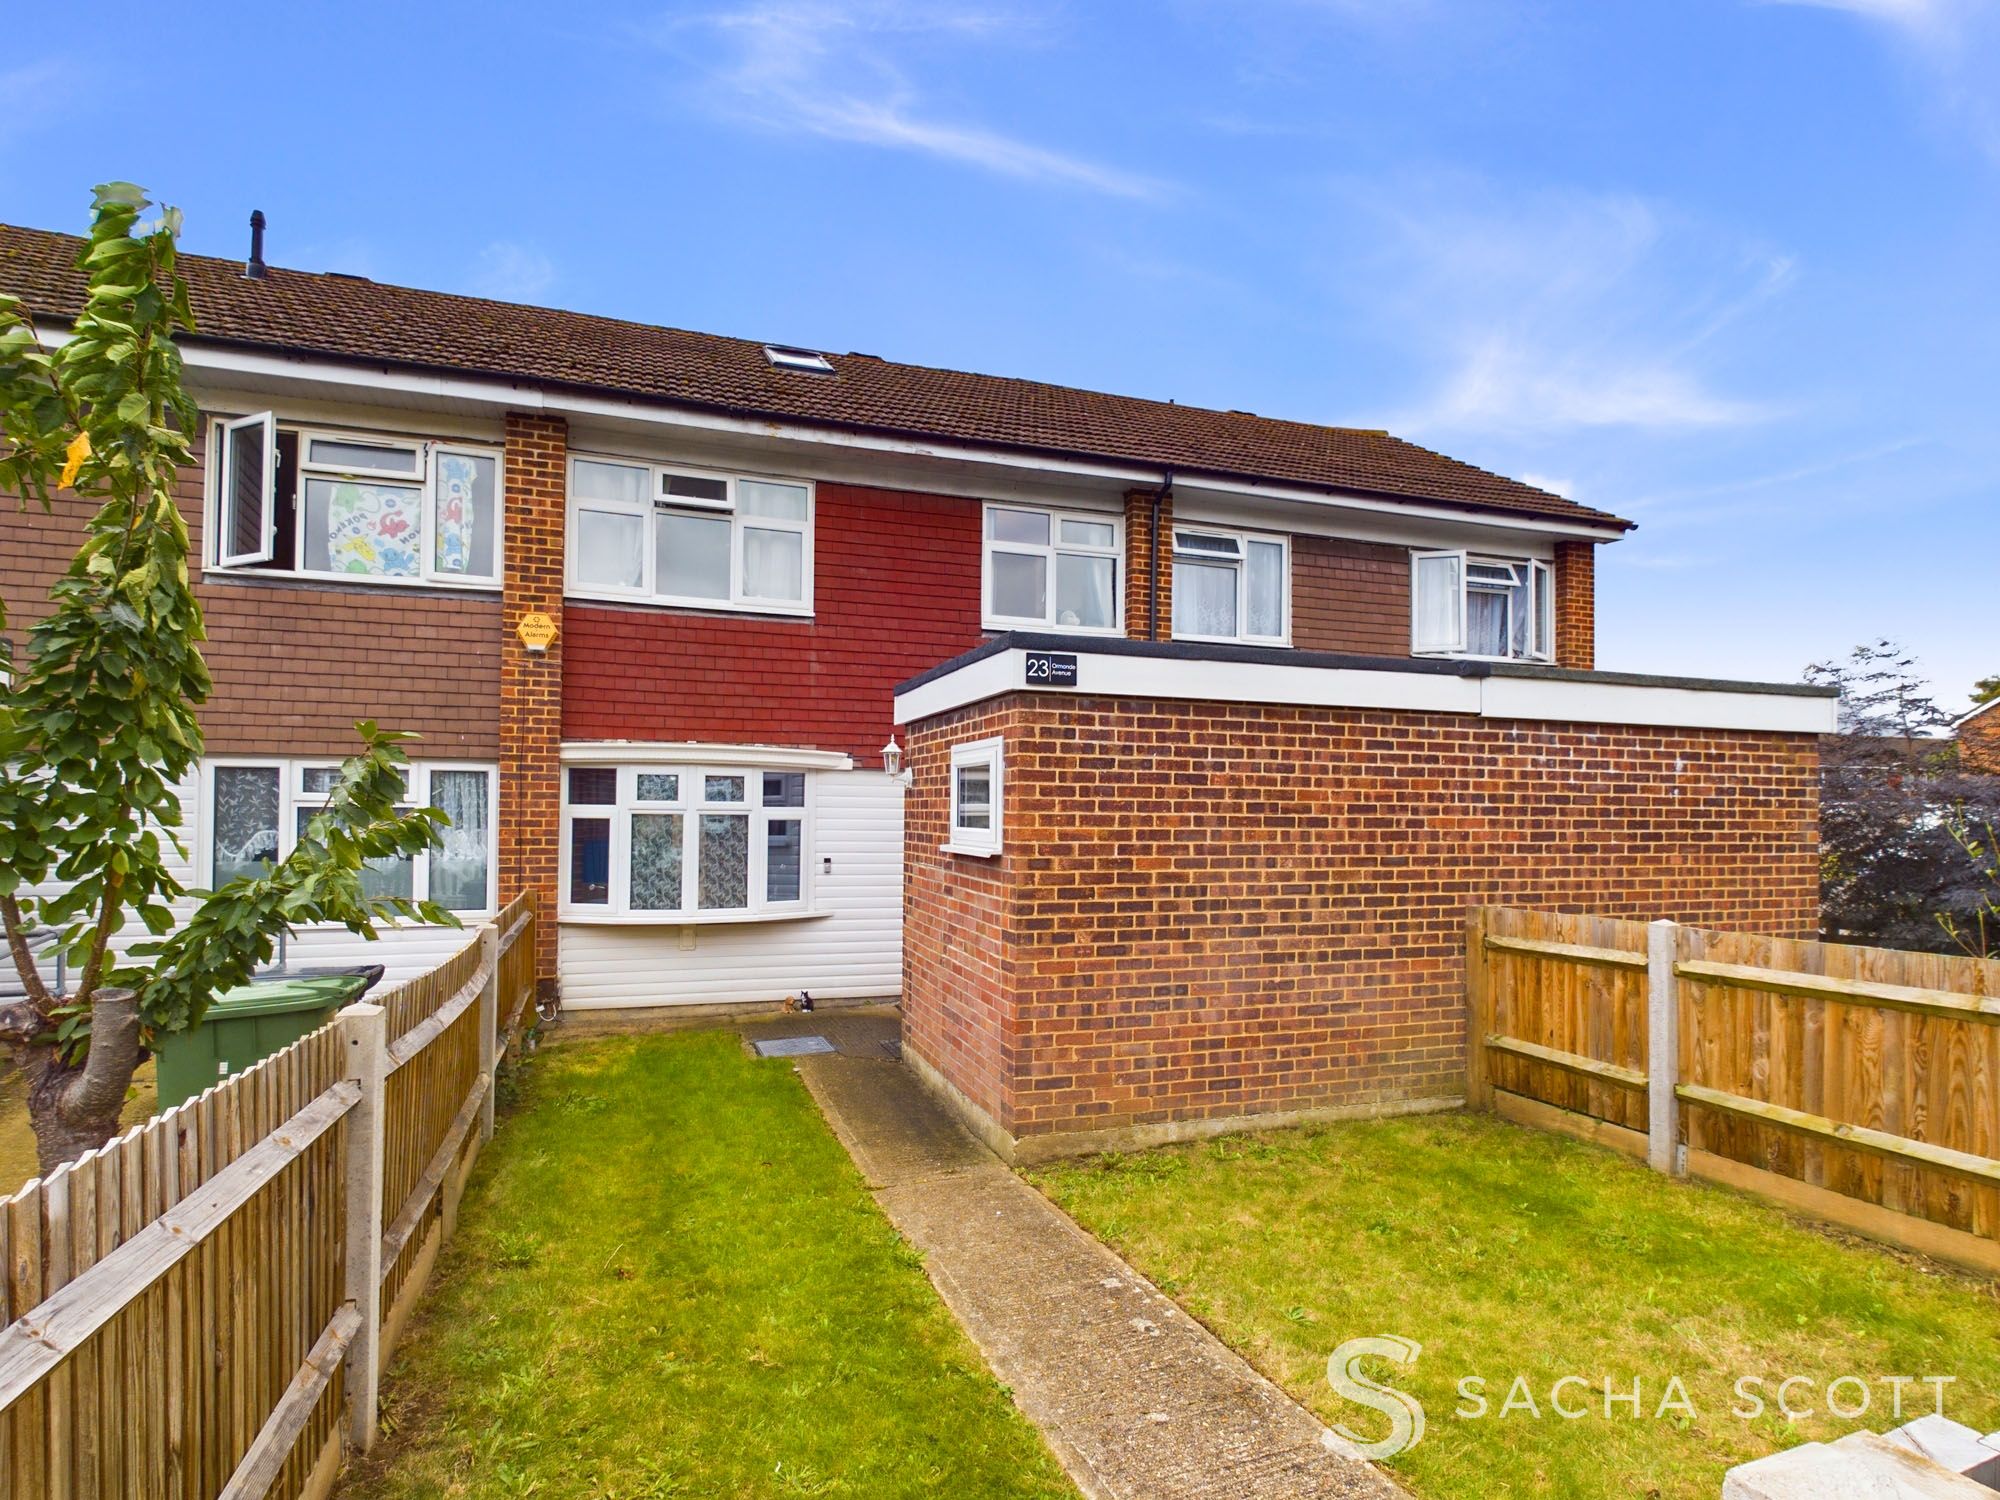 4 bed terraced house for sale in Ormonde Avenue, Epsom  - Property Image 1